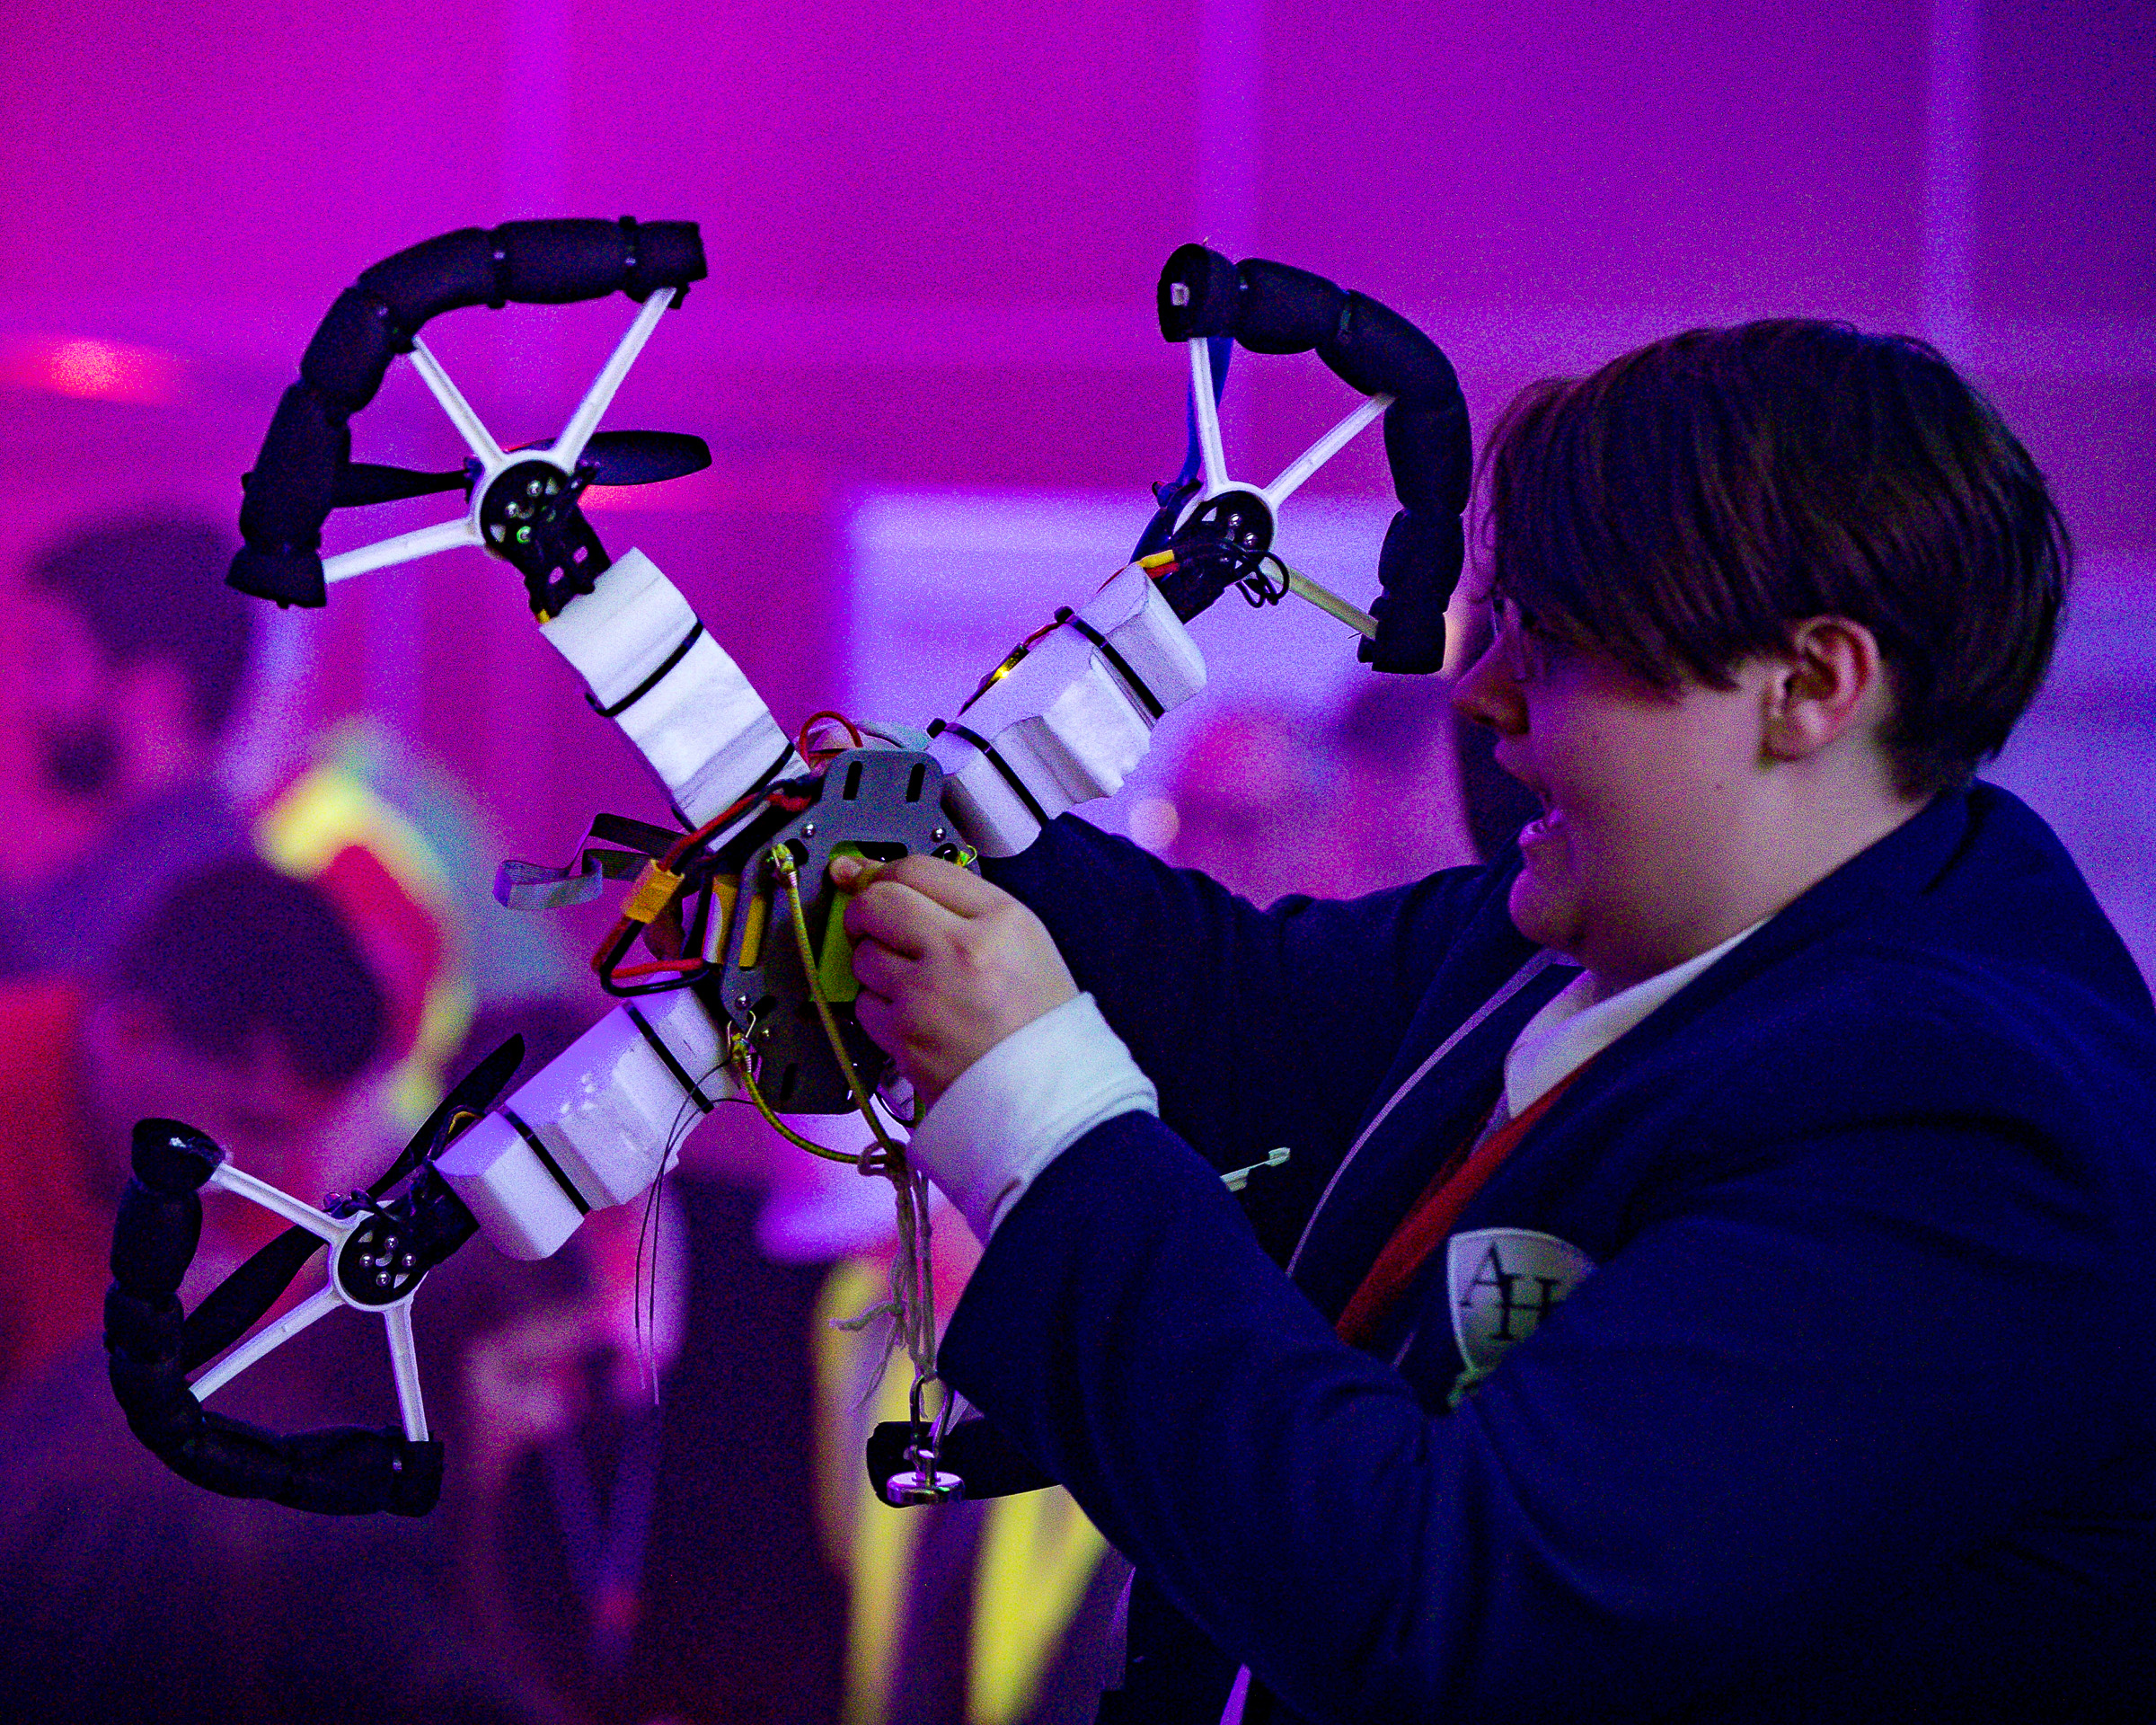 Image shows a school student holding a quadcopter model.